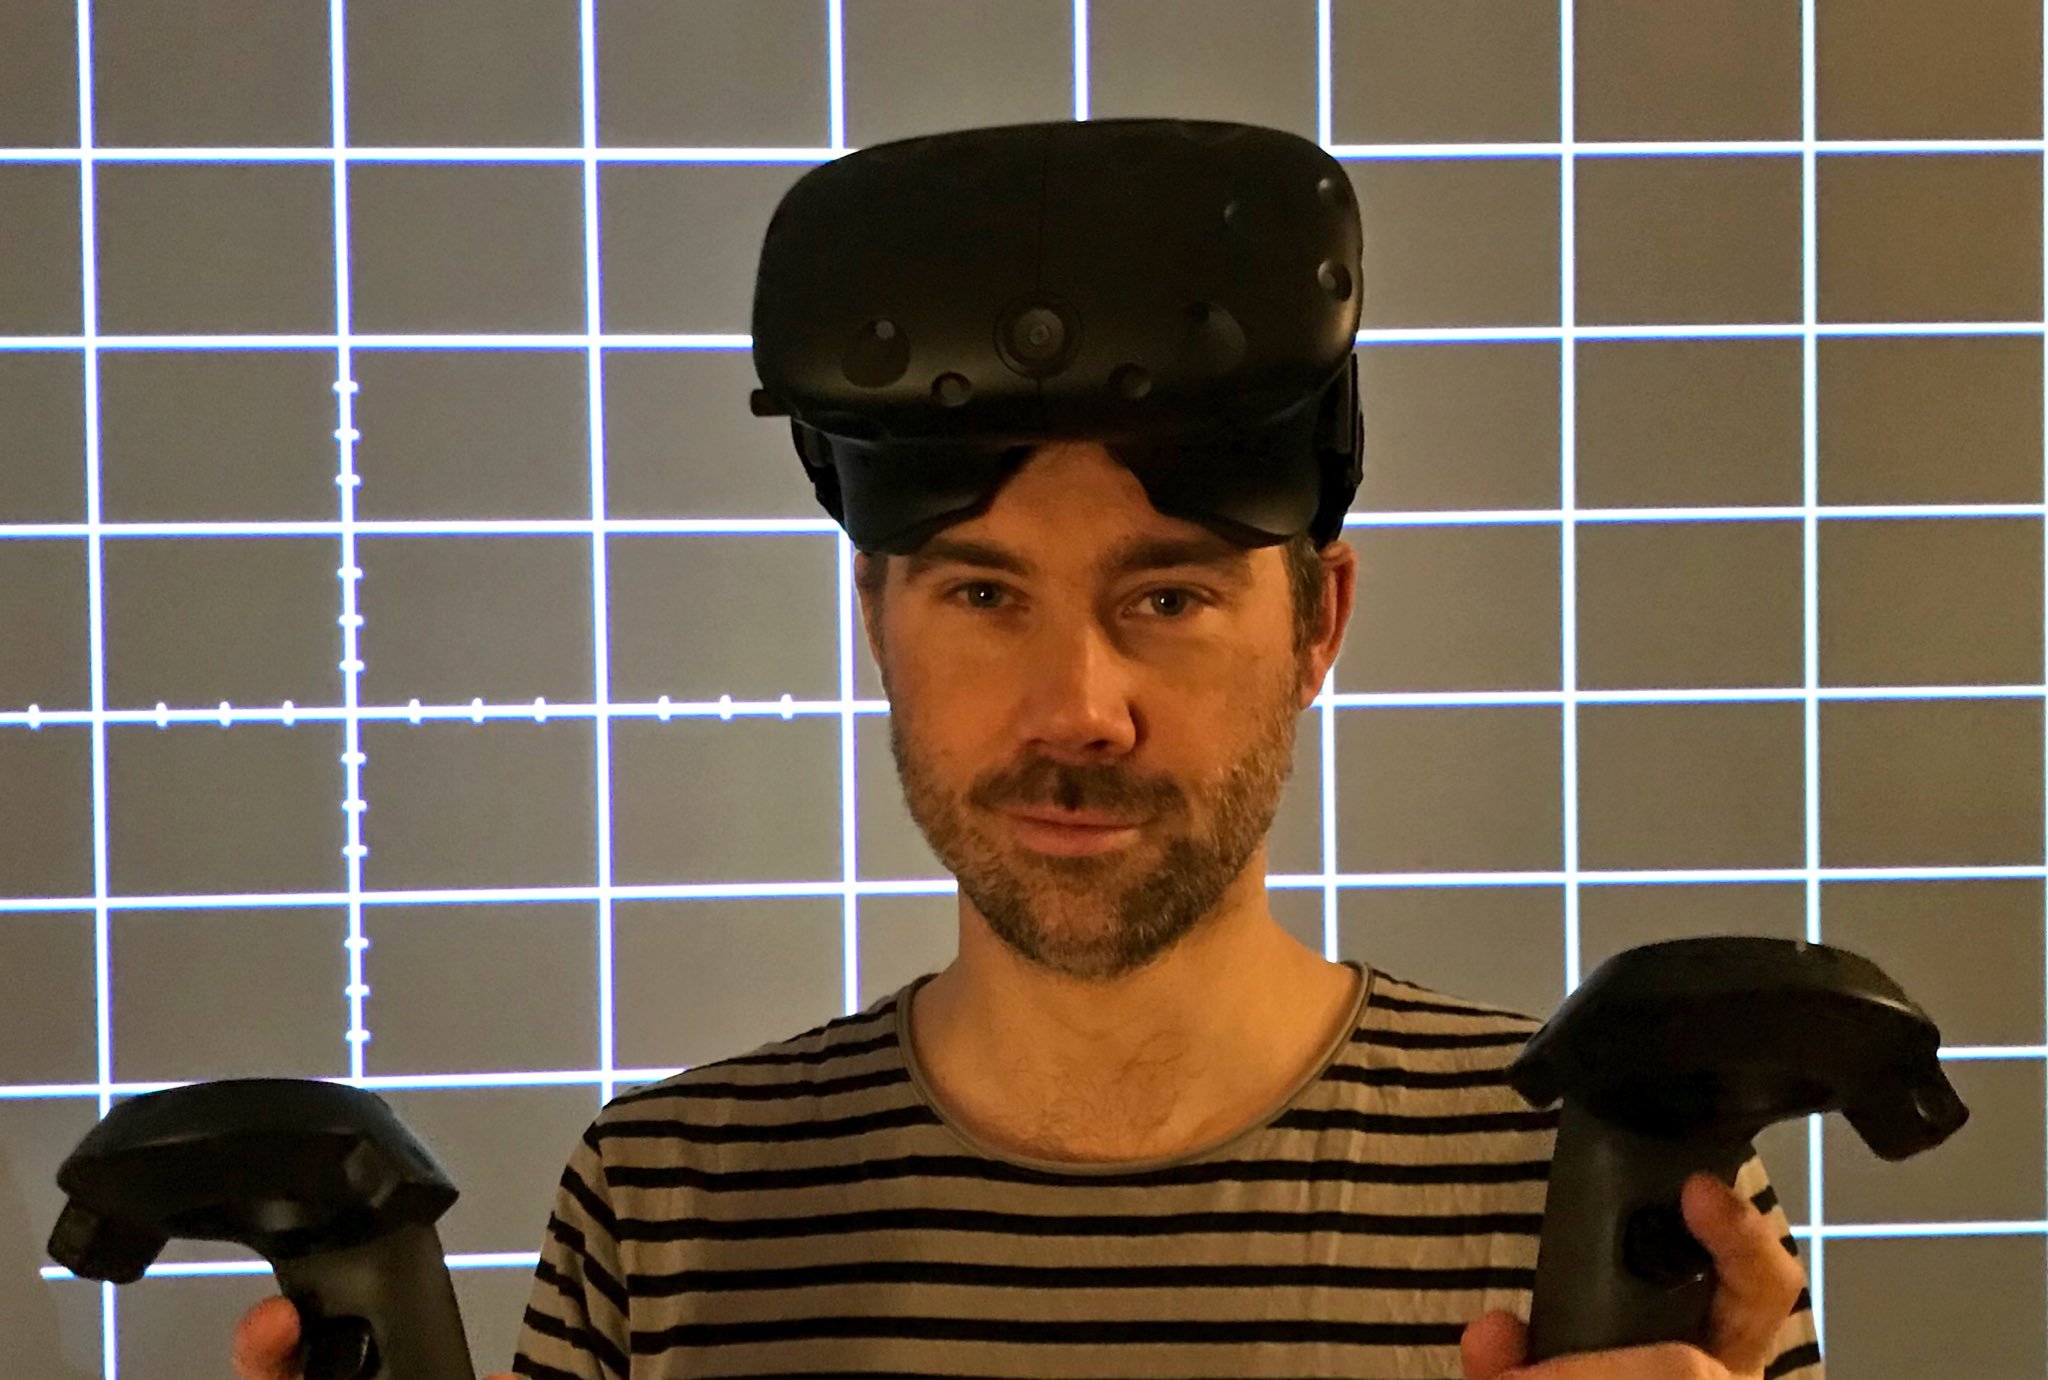 This is the new Oskar Burman, working at his own VR company 'Fast Travel Games'! 